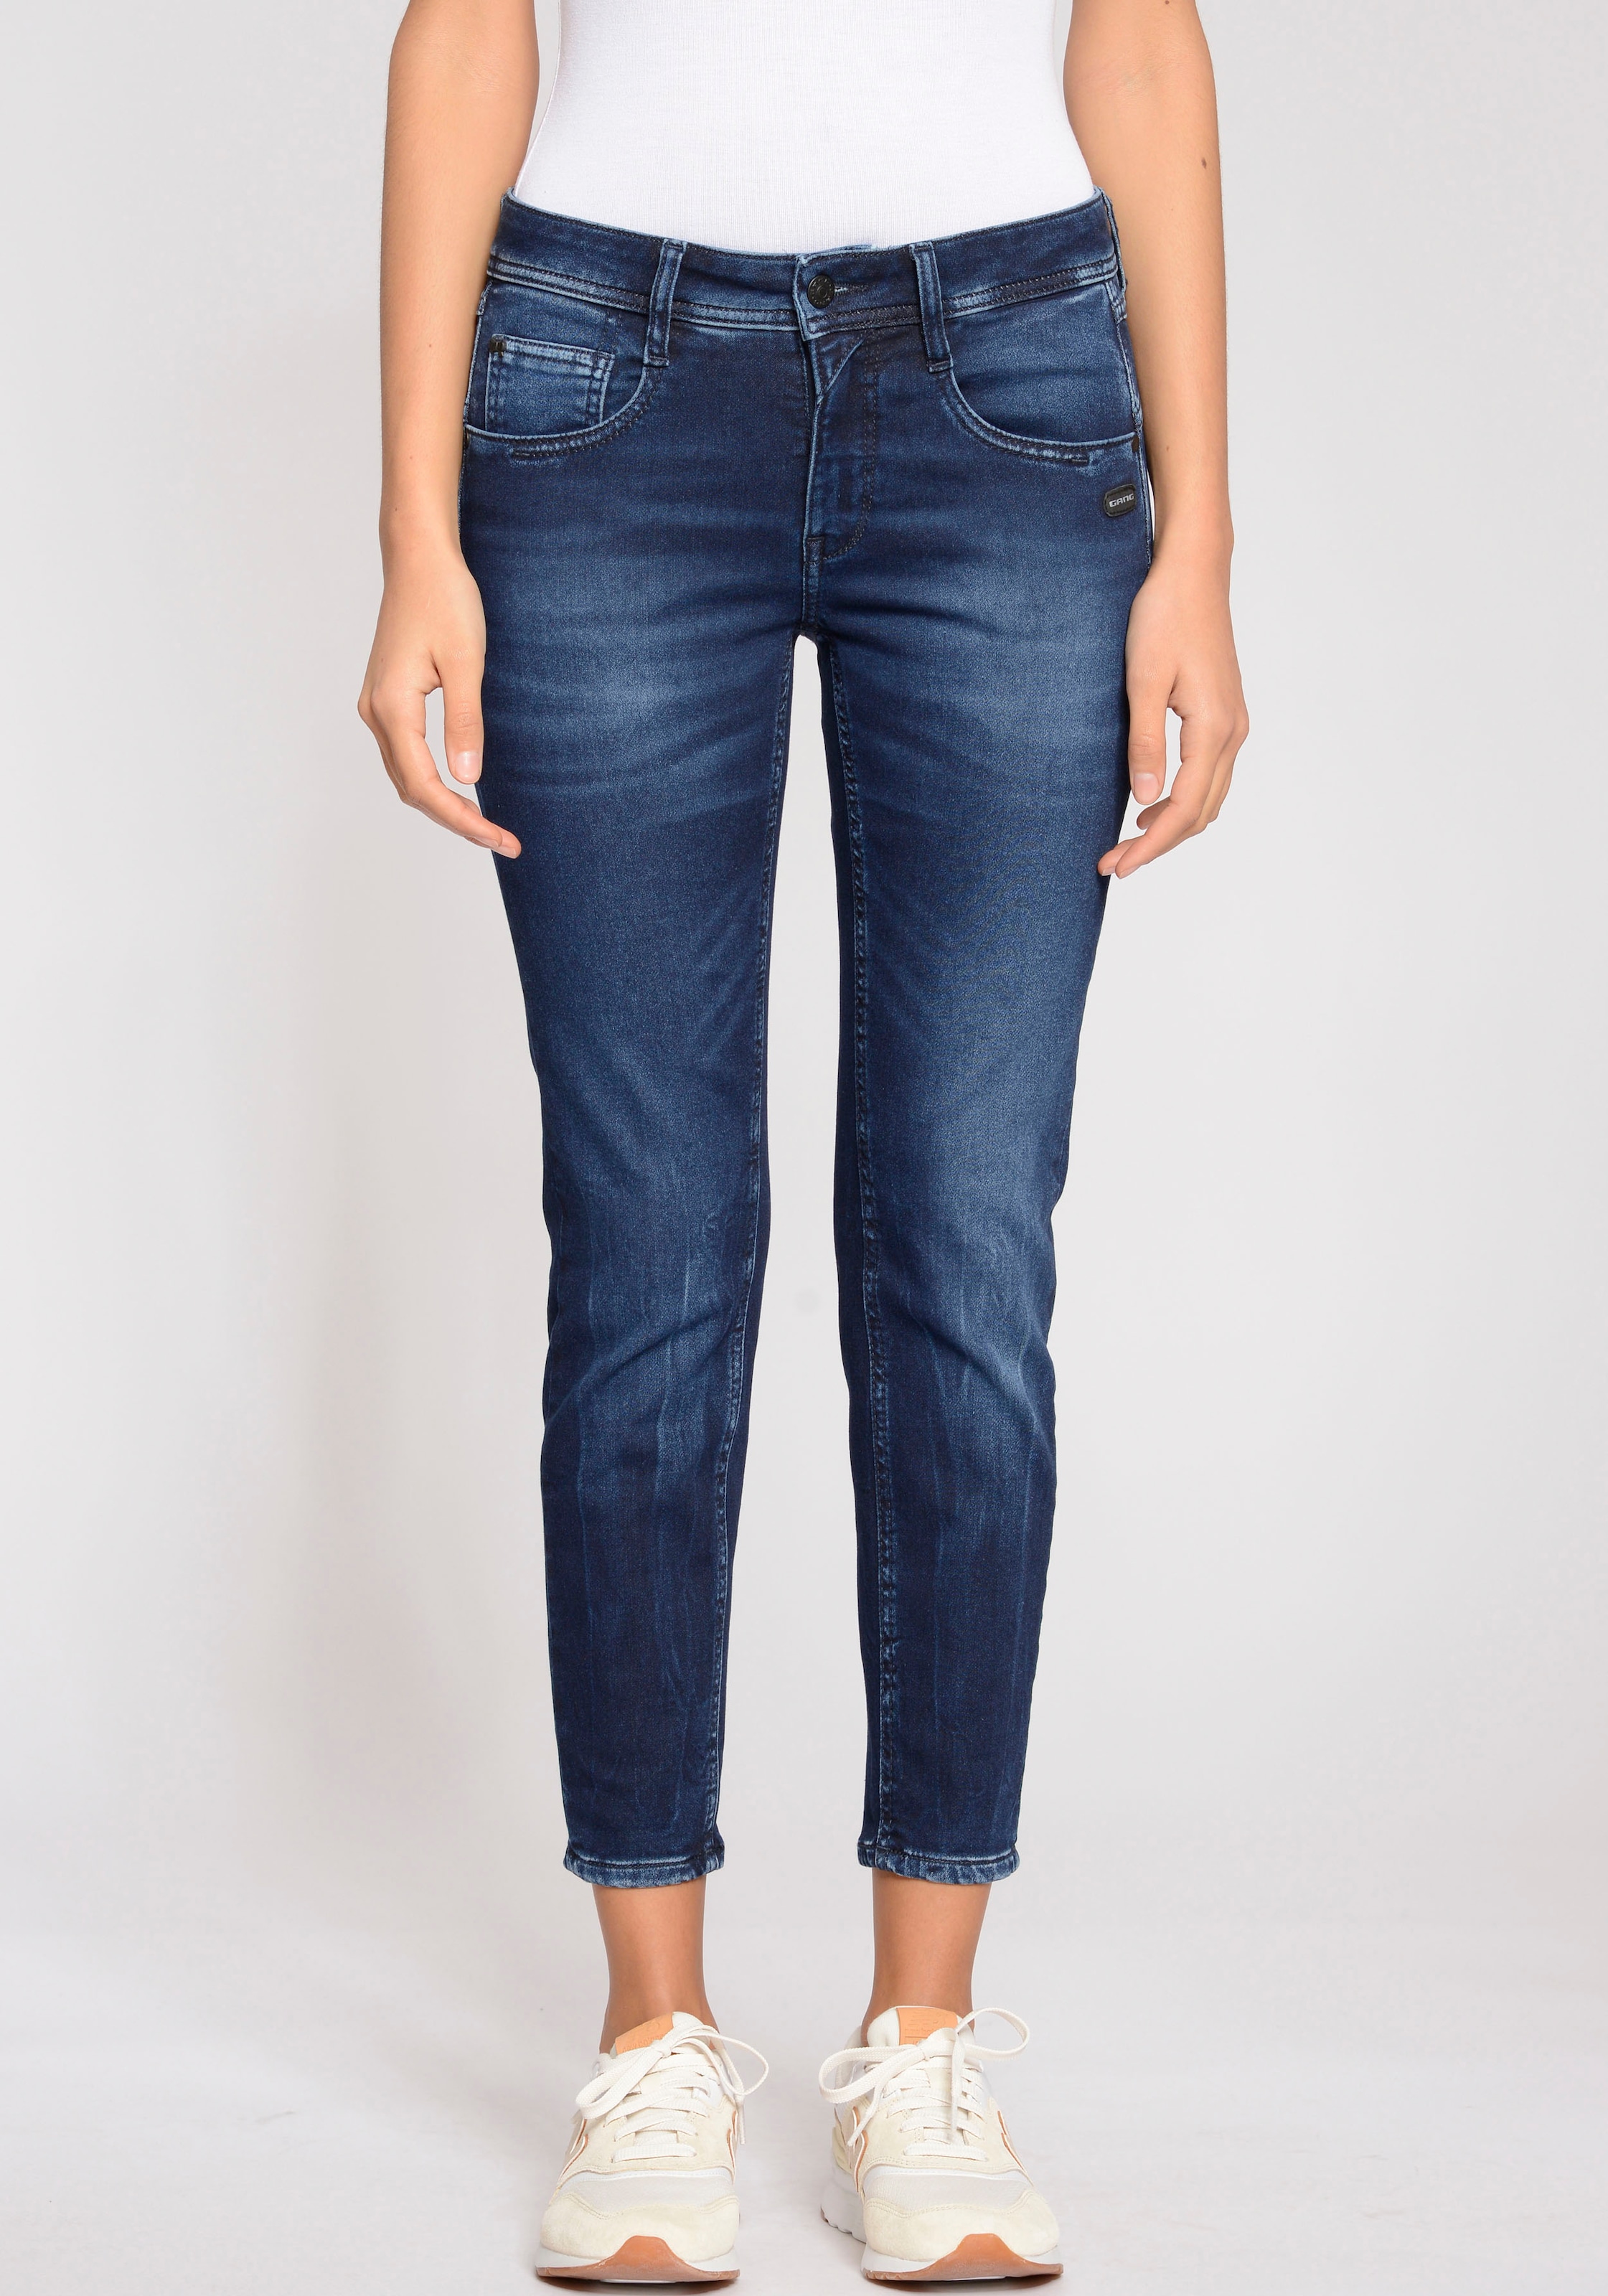 bei »94Amelie kaufen GANG OTTO Cropped« Relax-fit-Jeans